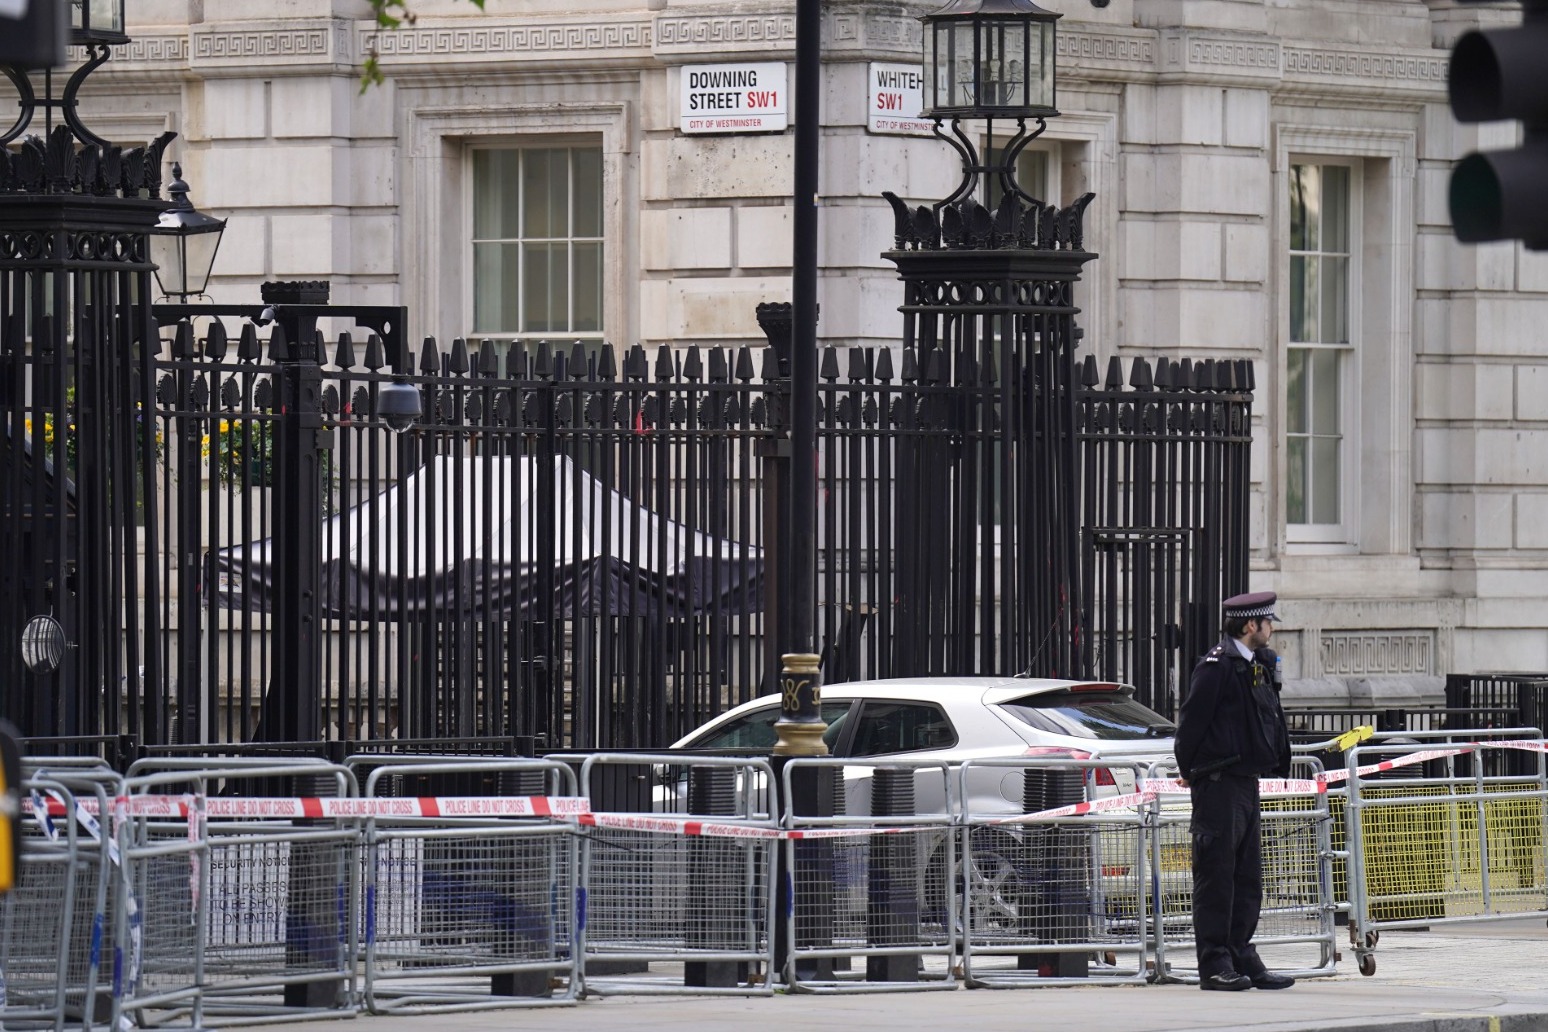 Man arrested after car crashes into gates of Downing Street 